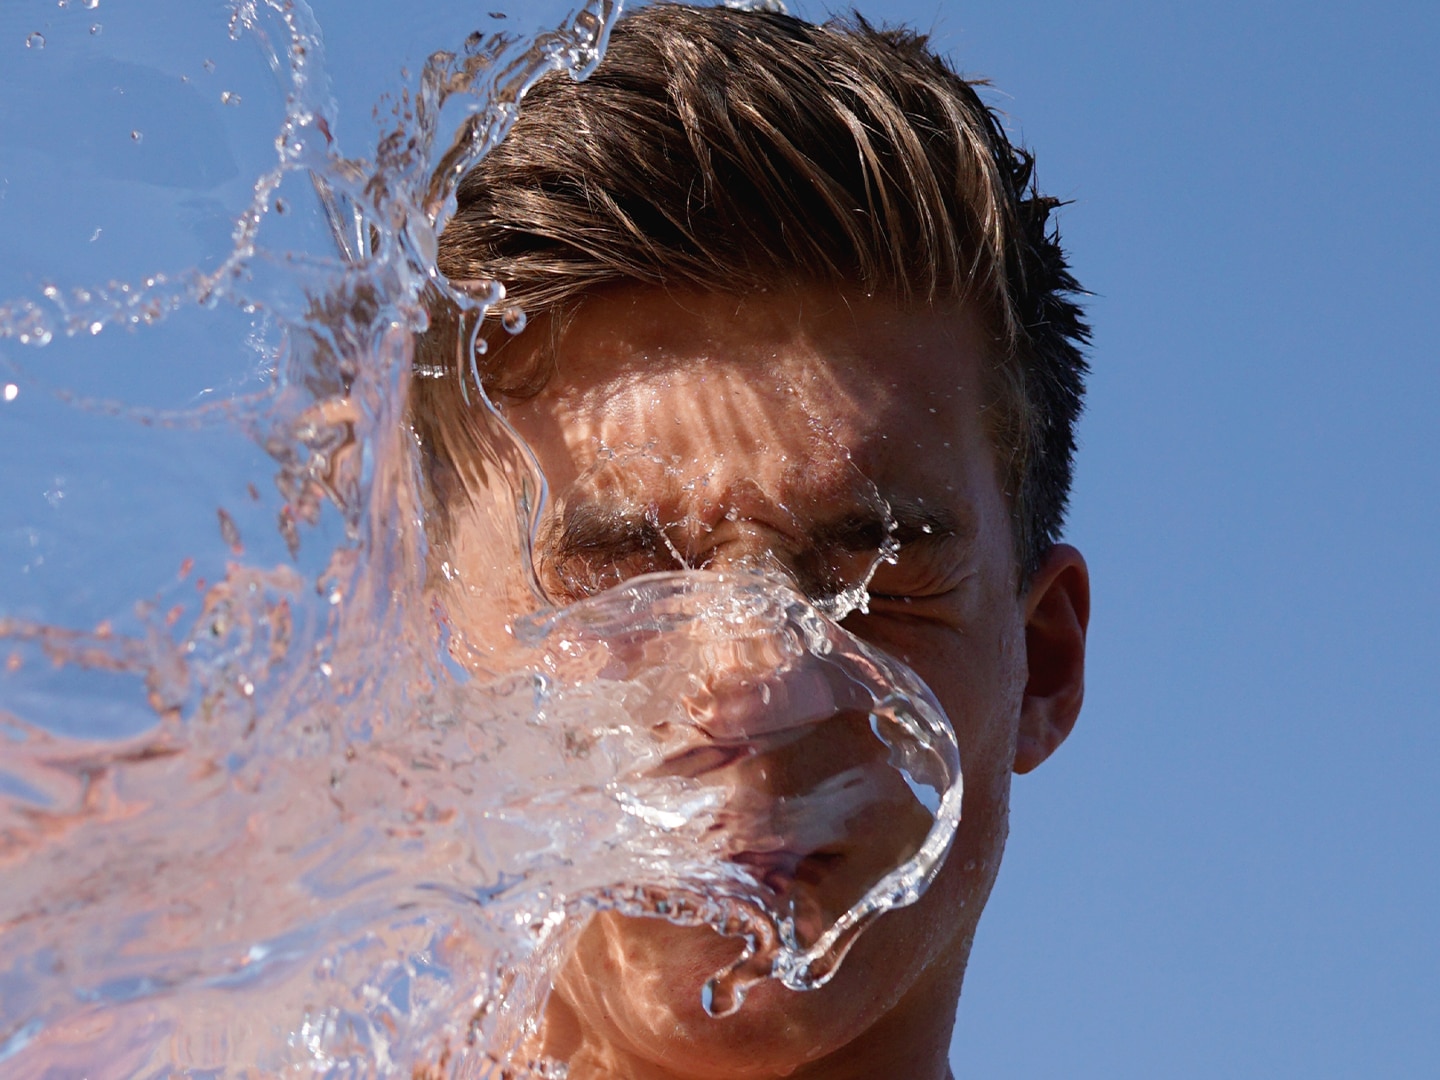 a guy splashing water into his own face